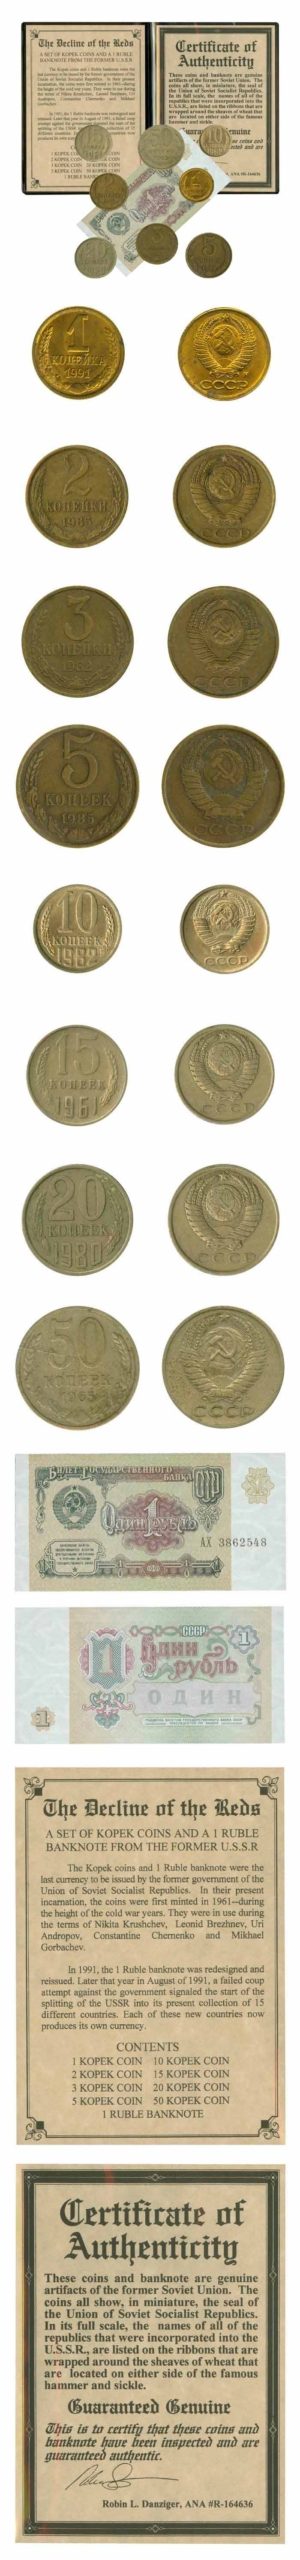 USSR - Decline Of The Reds - 1961 - 1991 - Coin & Currency Set - Folder & COA